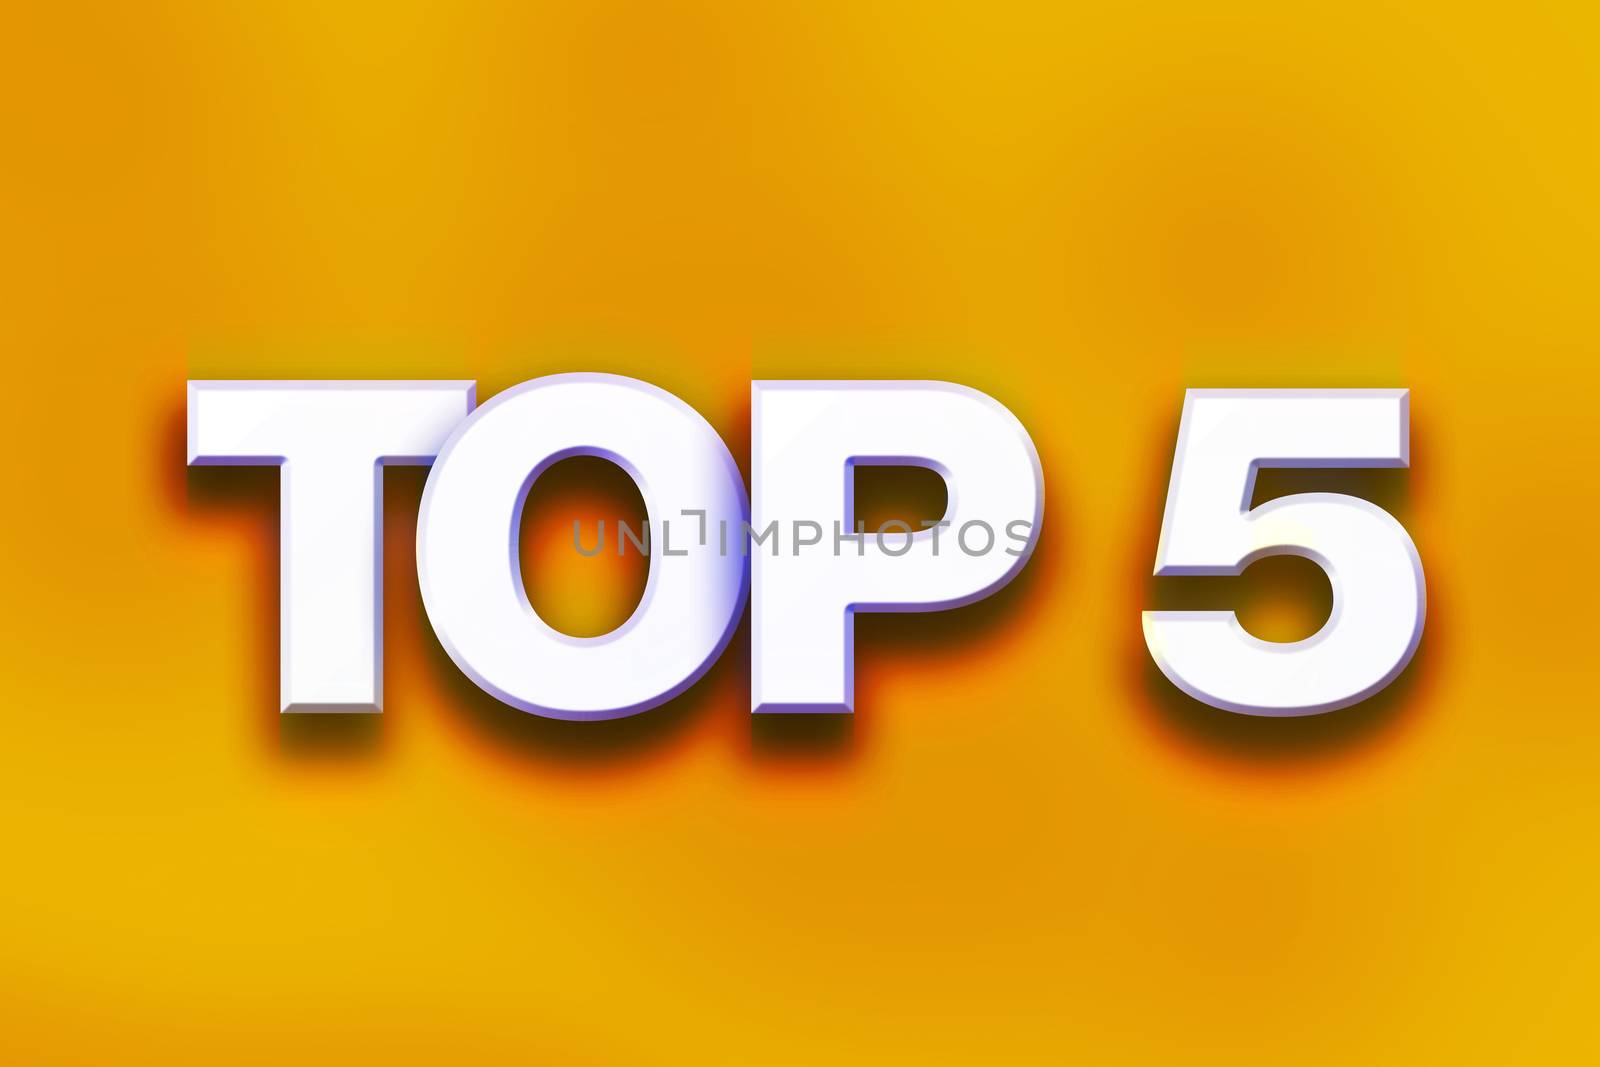 The word "Top 5" written in white 3D letters on a colorful background concept and theme.